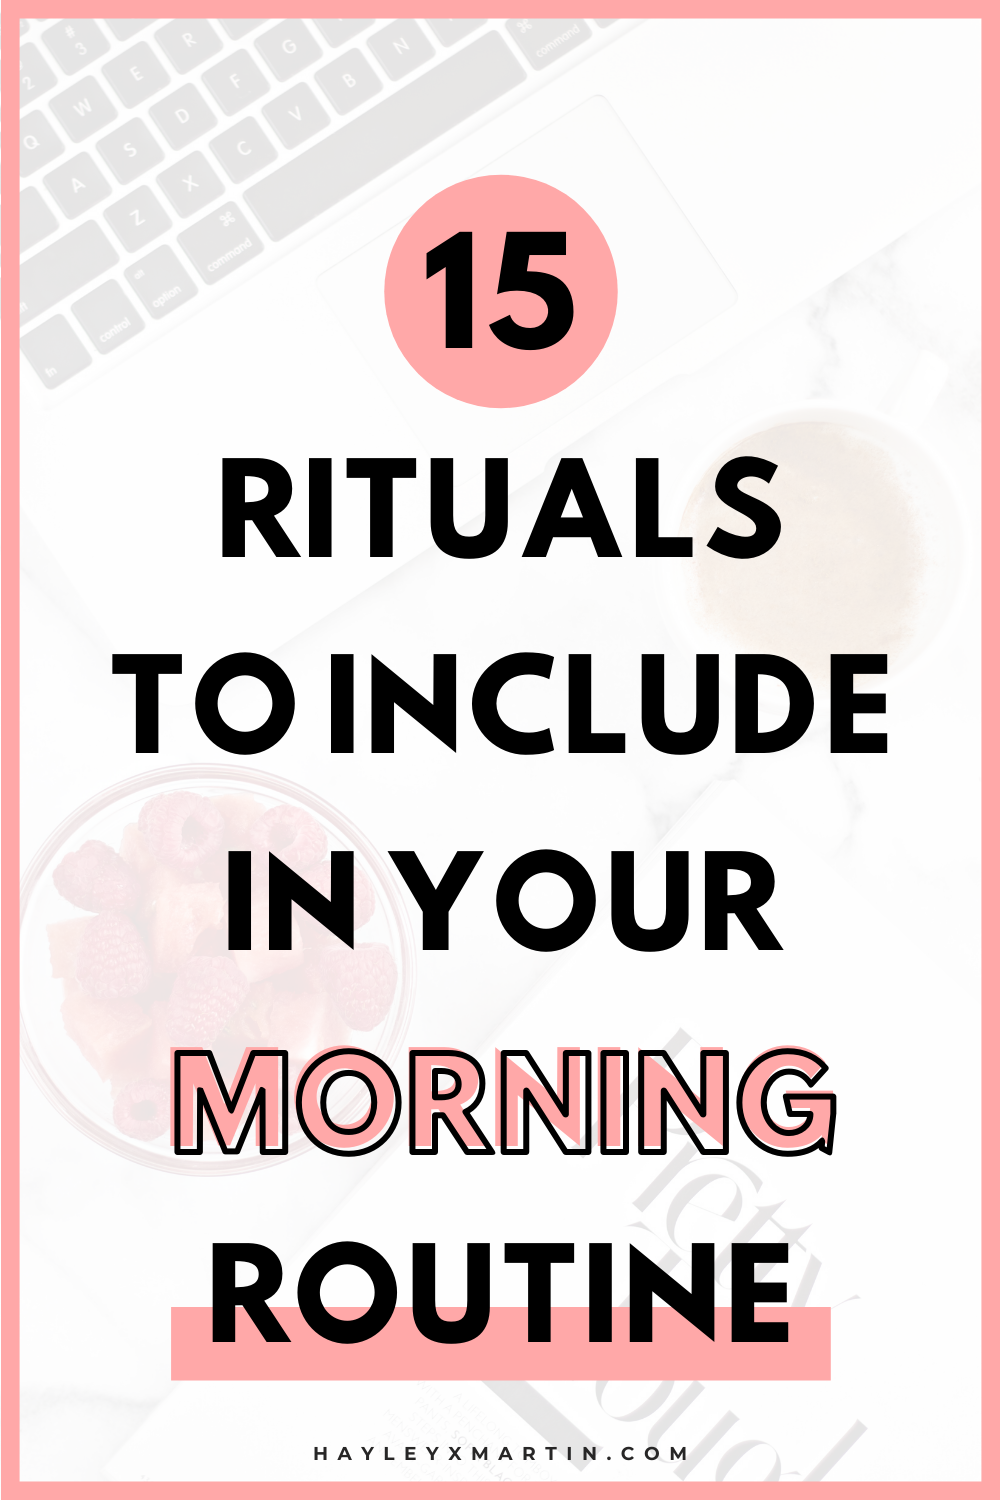 15 RITUALS TO INCLUDE IN YOUR MORNING ROUTINE | HAYLEYXMARTIN